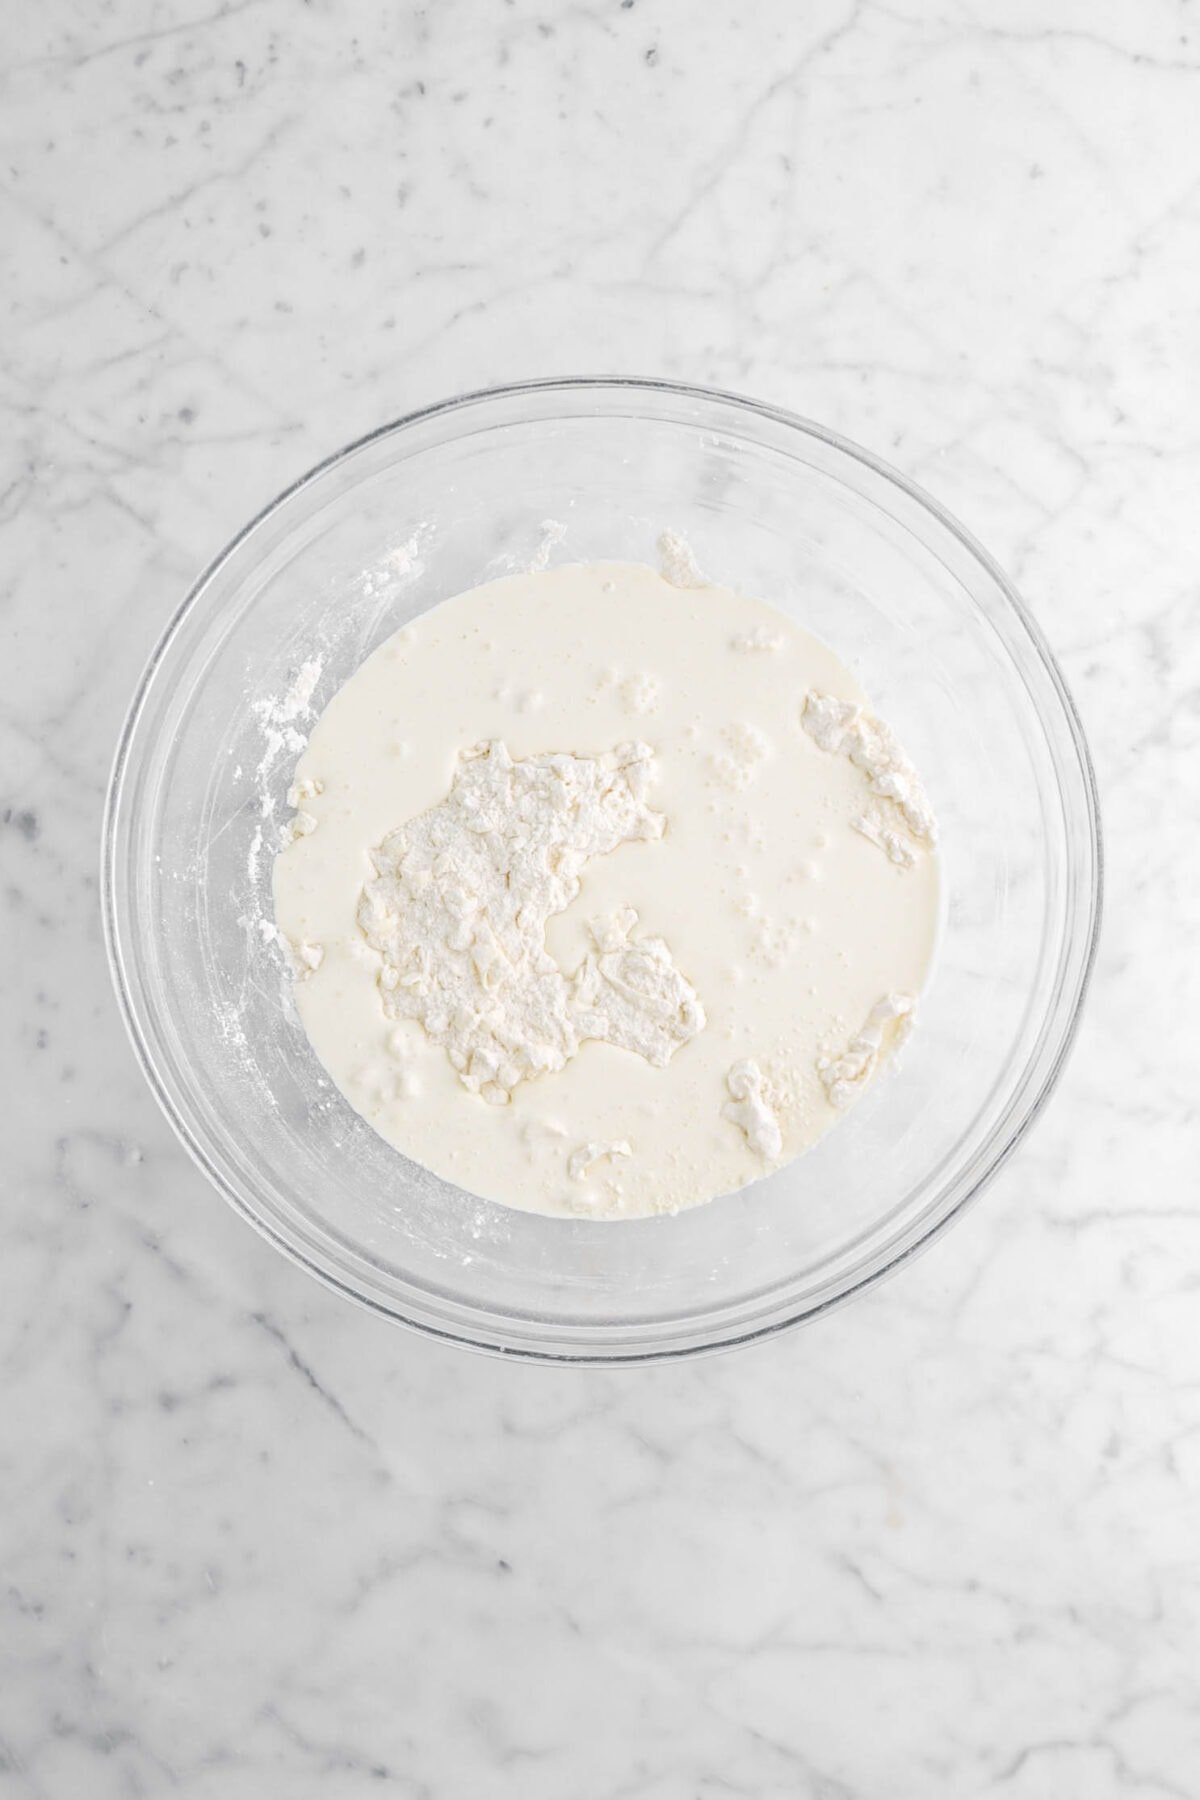 cream mixture added to dry ingredients